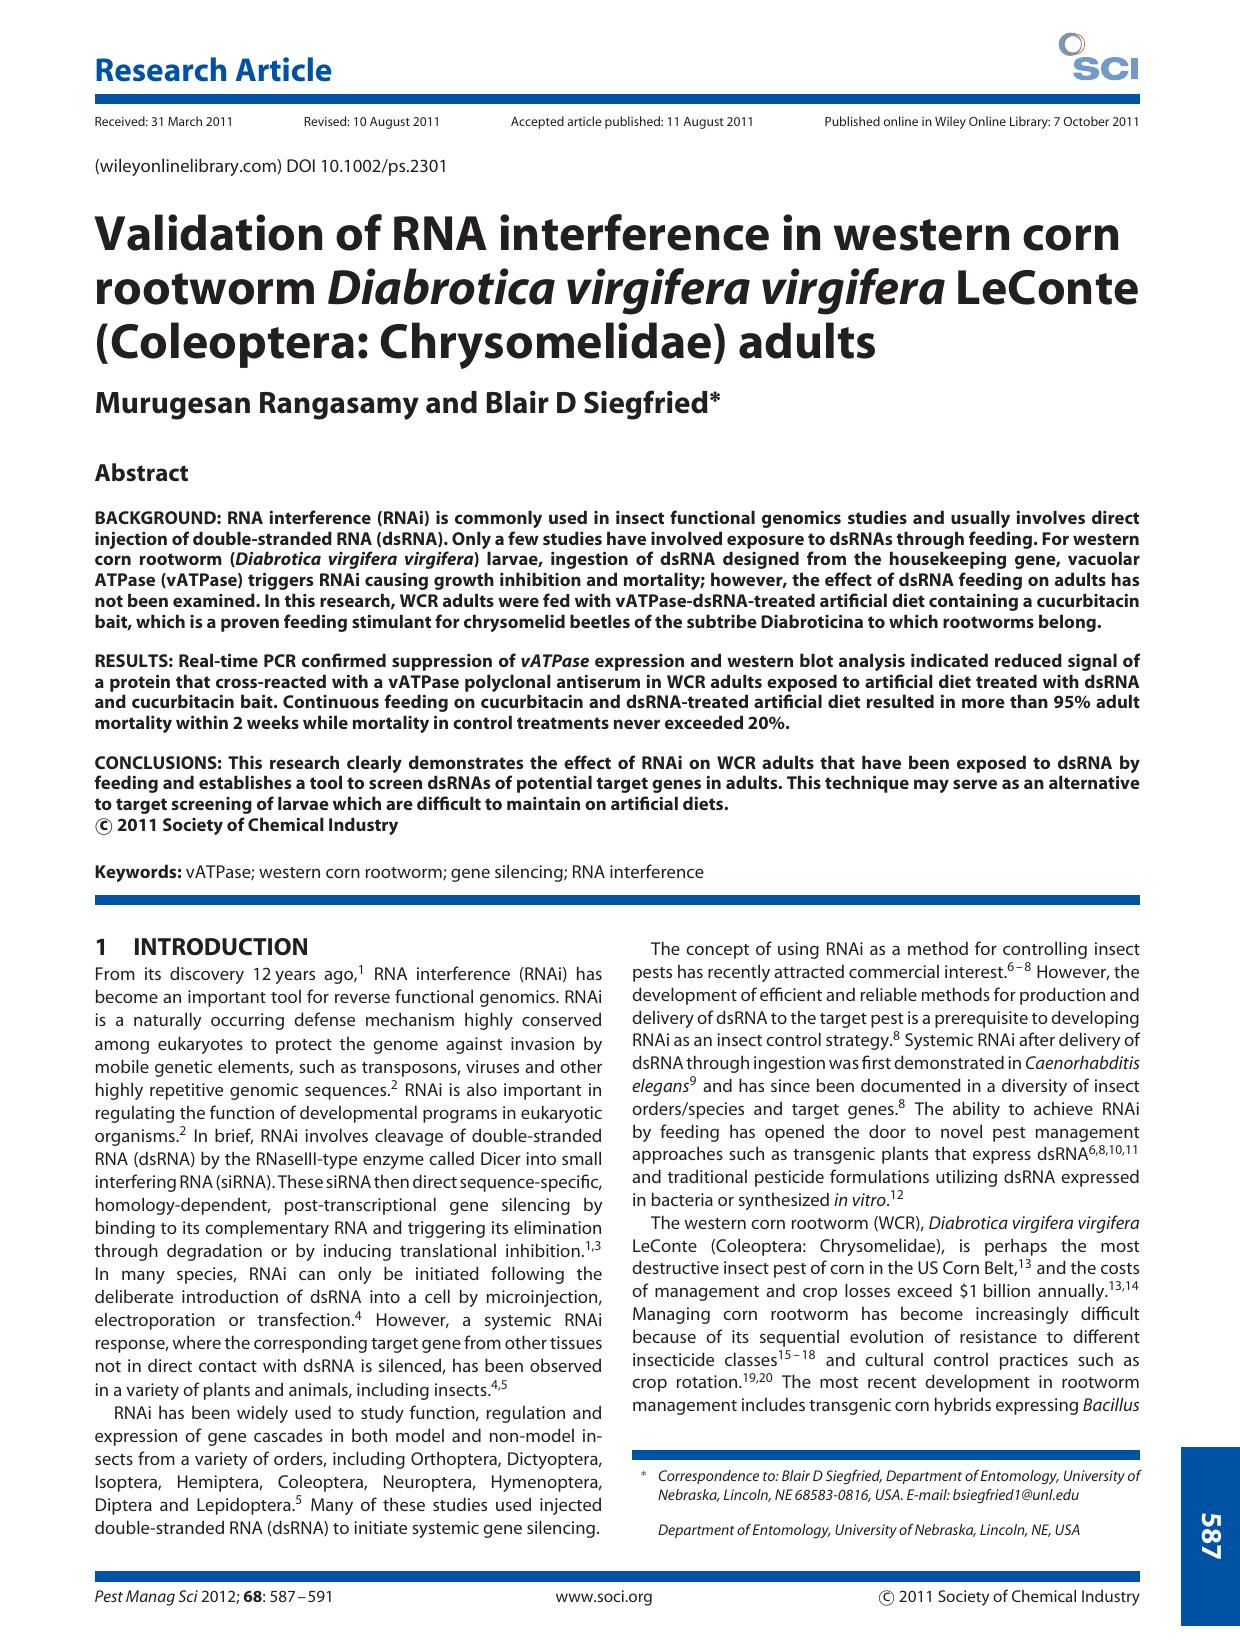 Validation of RNA interference in western corn rootworm Diabrotica virgifera virgifera LeConte (Coleoptera: Chrysomelidae) adults by Unknown